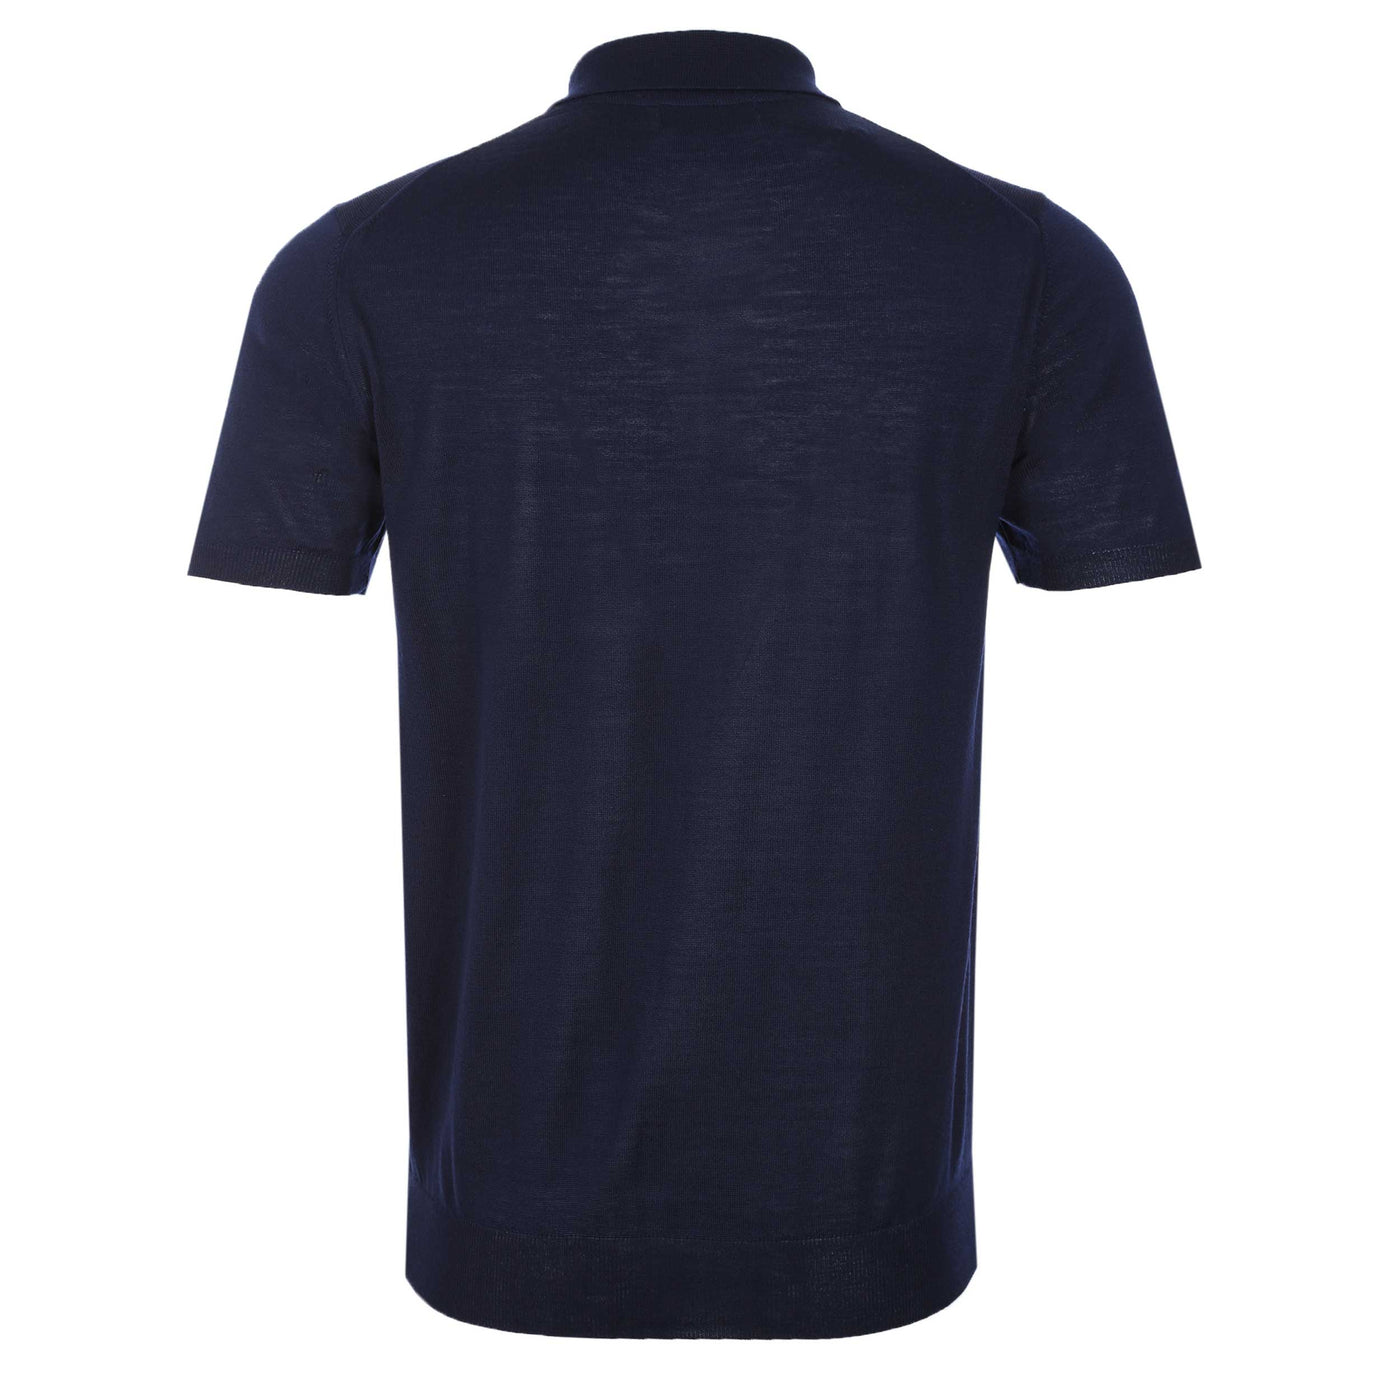 Oliver Sweeney Covehithe Polo Knitwear in Navy Back